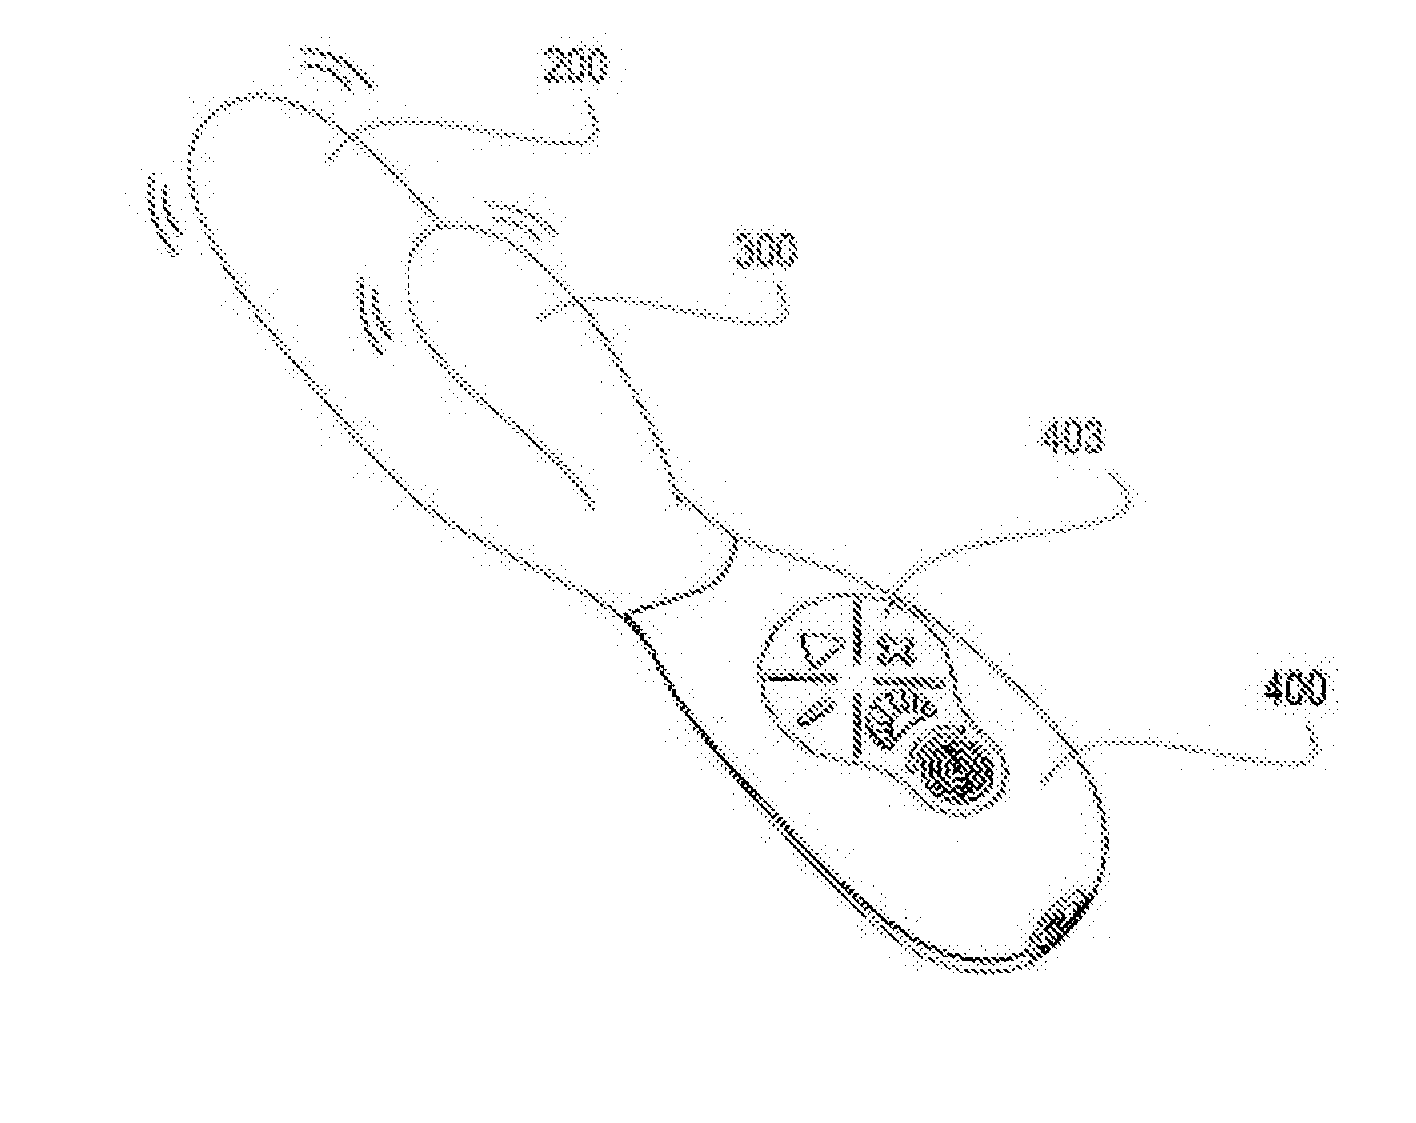 Sexual stimulation device using light therapy, vibration and physiological feedback